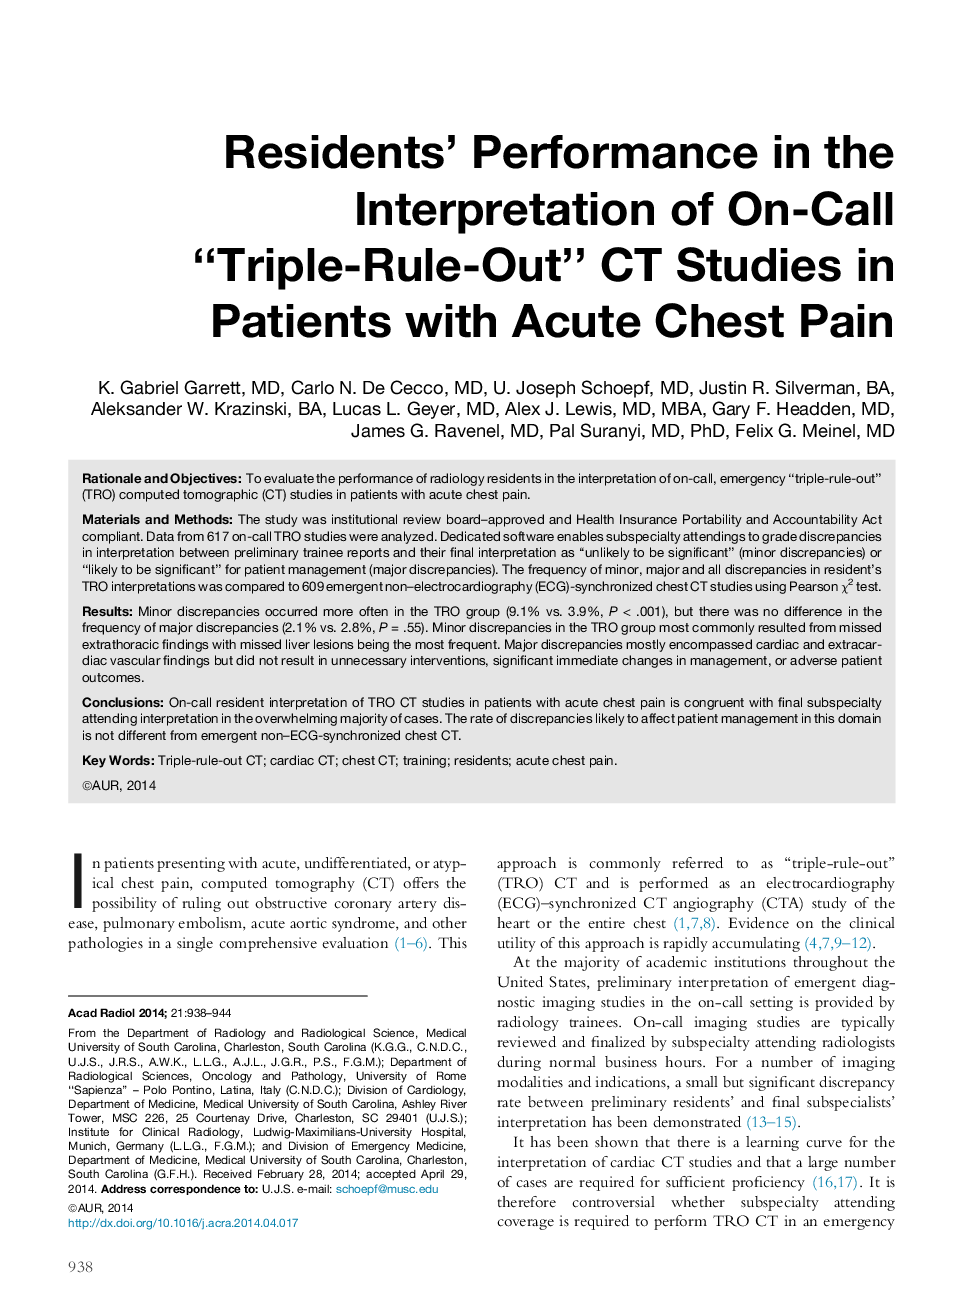 Residents' Performance in the Interpretation of On-Call “Triple-Rule-Out” CT Studies in Patients with Acute Chest Pain